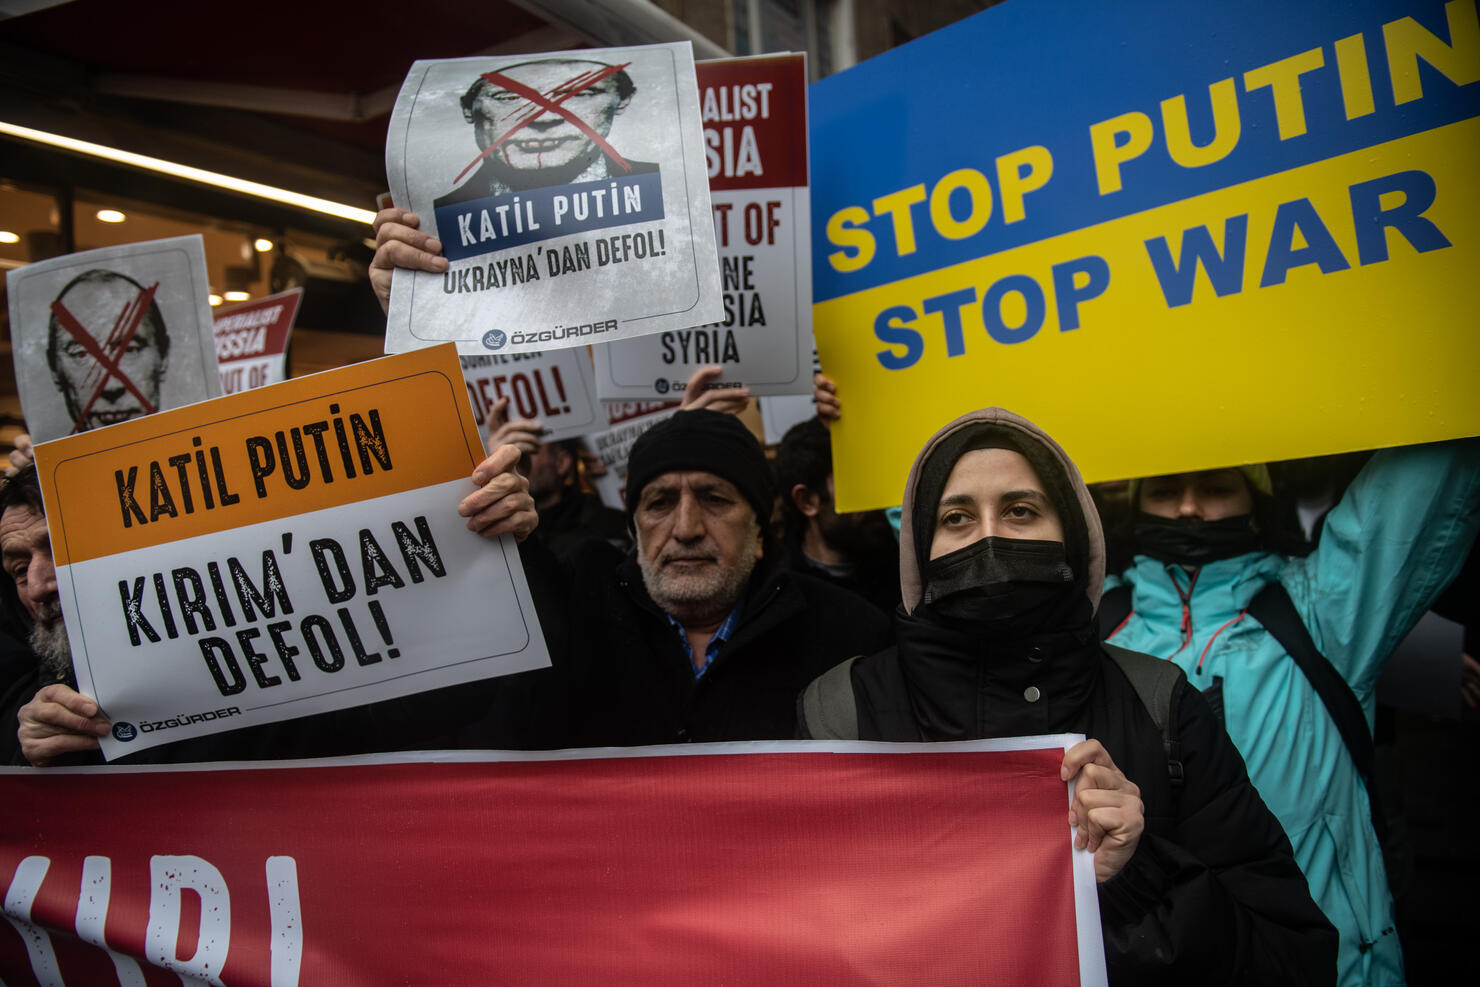 Protest At Russian Consulate After Russia's Invasion Of Ukraine